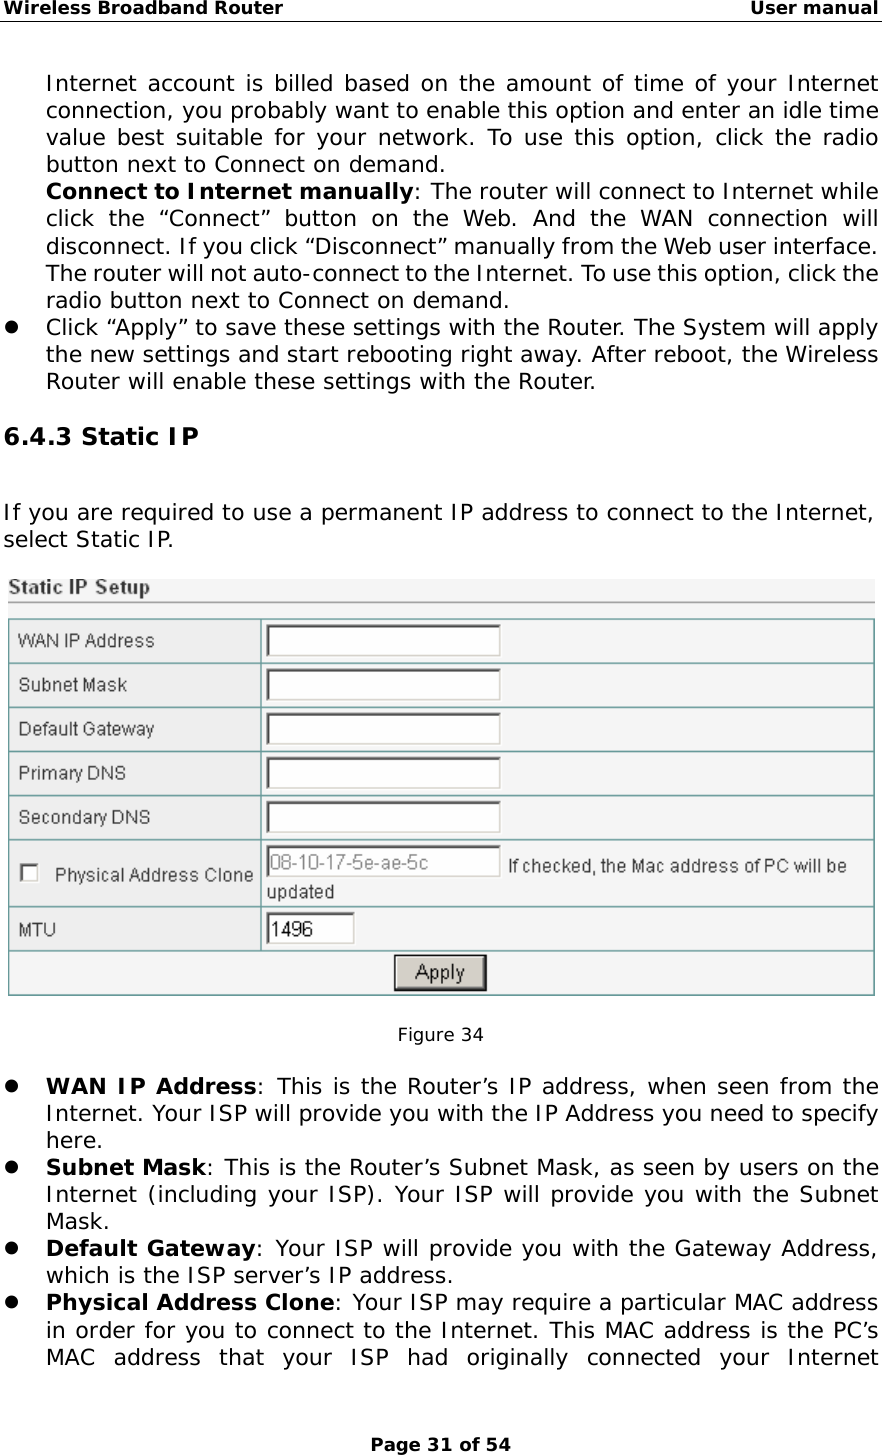 Wireless Broadband Router                                                   User manual Page 31 of 54 Internet account is billed based on the amount of time of your Internet connection, you probably want to enable this option and enter an idle time value best suitable for your network. To use this option, click the radio button next to Connect on demand. Connect to Internet manually: The router will connect to Internet while click the “Connect” button on the Web. And the WAN connection will disconnect. If you click “Disconnect” manually from the Web user interface. The router will not auto-connect to the Internet. To use this option, click the radio button next to Connect on demand. z Click “Apply” to save these settings with the Router. The System will apply the new settings and start rebooting right away. After reboot, the Wireless Router will enable these settings with the Router. 6.4.3 Static IP If you are required to use a permanent IP address to connect to the Internet, select Static IP.    Figure 34  z WAN IP Address: This is the Router’s IP address, when seen from the Internet. Your ISP will provide you with the IP Address you need to specify here. z Subnet Mask: This is the Router’s Subnet Mask, as seen by users on the Internet (including your ISP). Your ISP will provide you with the Subnet Mask. z Default Gateway: Your ISP will provide you with the Gateway Address, which is the ISP server’s IP address. z Physical Address Clone: Your ISP may require a particular MAC address in order for you to connect to the Internet. This MAC address is the PC’s MAC address that your ISP had originally connected your Internet 